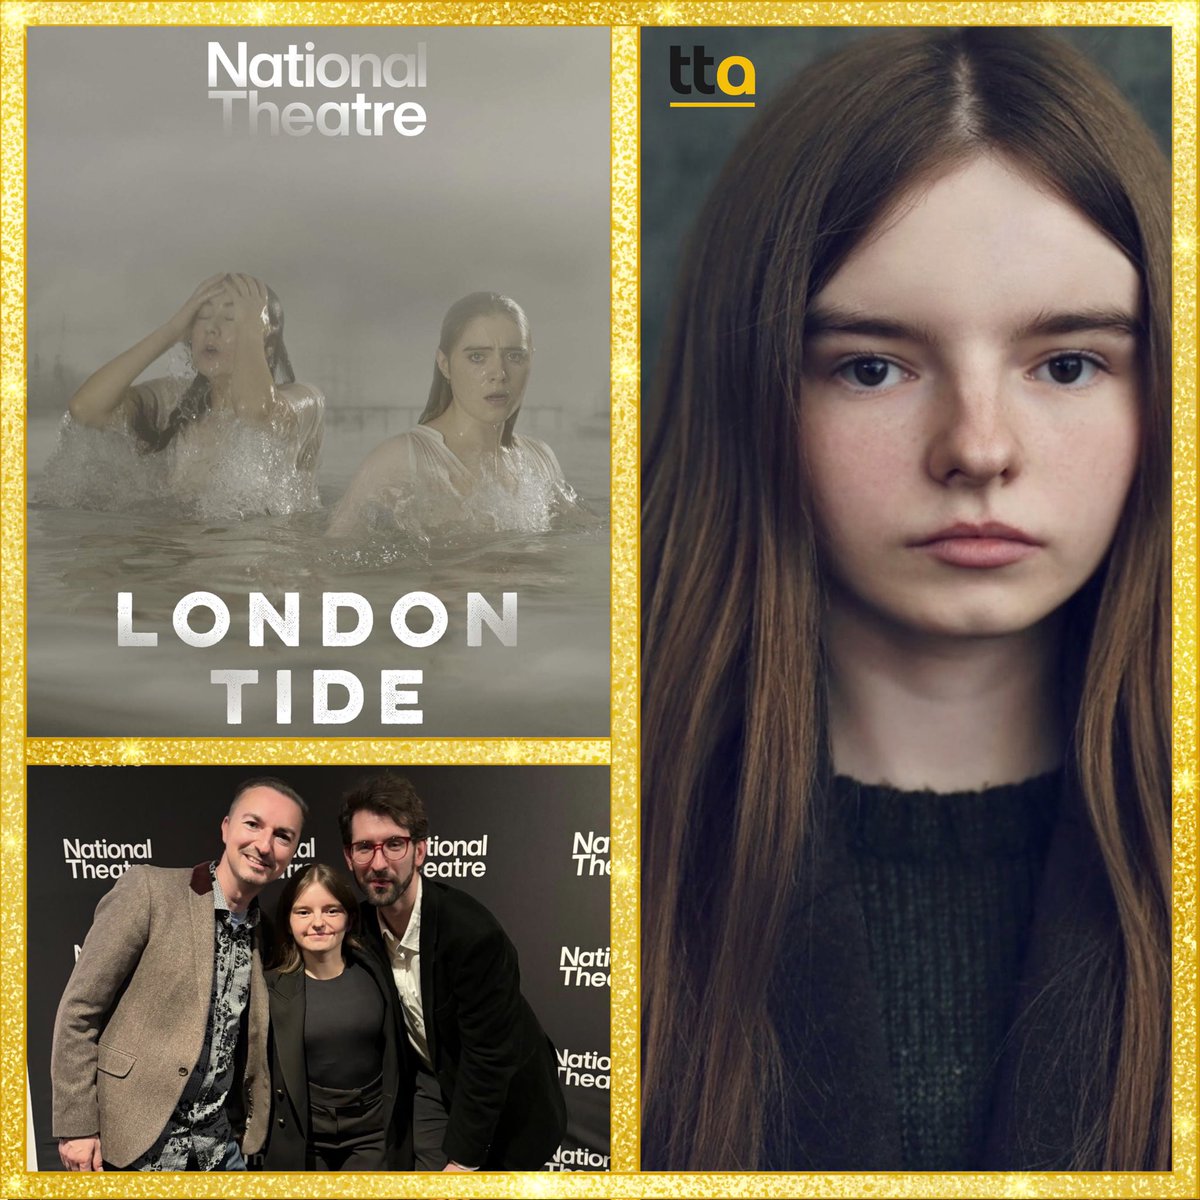 It was press night last night for our brilliant ELLIE-MAY SHERIDAN in London Tide at the National Theatre. We couldn’t be more proud of Ellie-May’s performance. She was simply amazing! 💥✨ ⭐️Client: @EllieMaySherida #tta #ttaadults #nationaltheatre #londontide